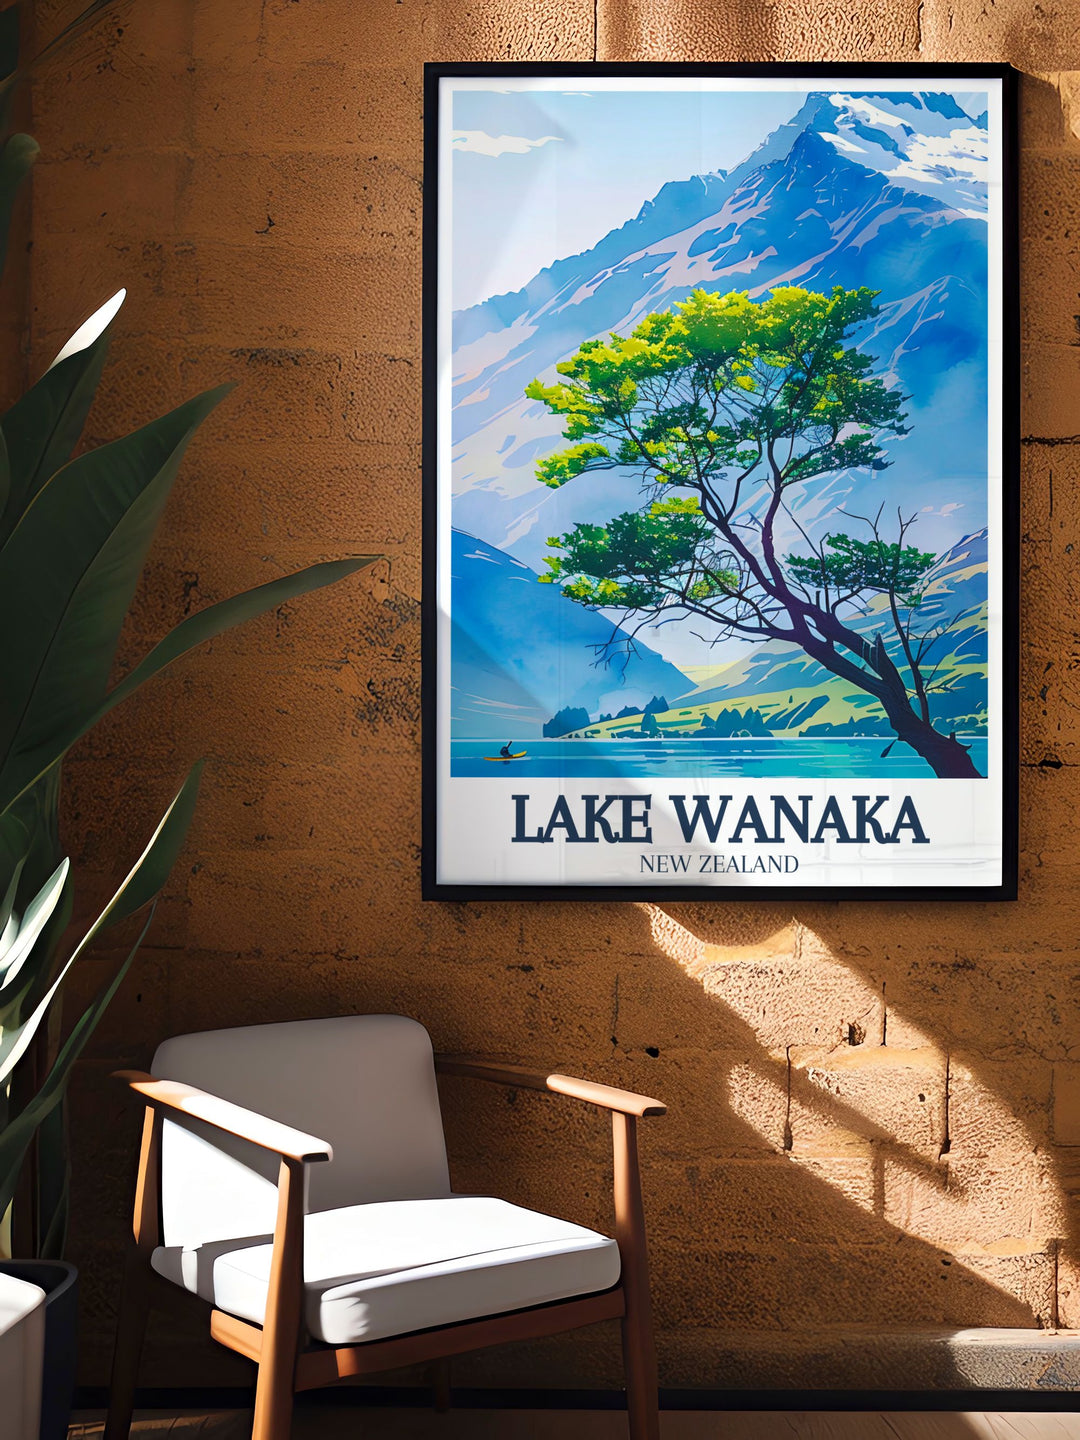 Modern Lake Wanaka wall art featuring the famous lake wanaka tree in Mount Aspiring National Park A beautiful addition to any home decor offering a serene and peaceful ambiance